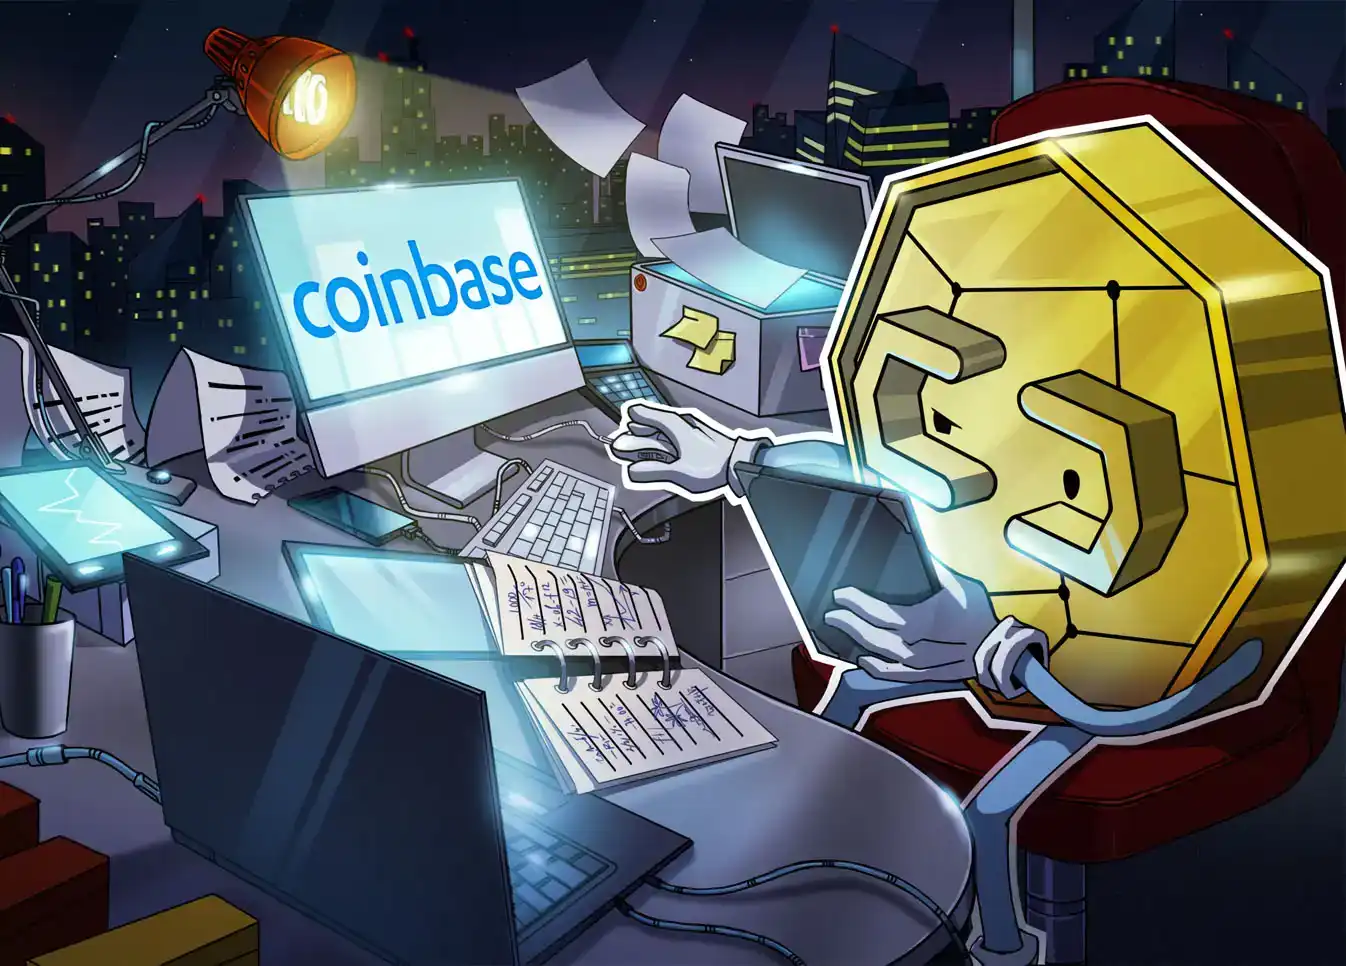 Citron Calls for Short Sale of Coinbase Stock Amid Outage